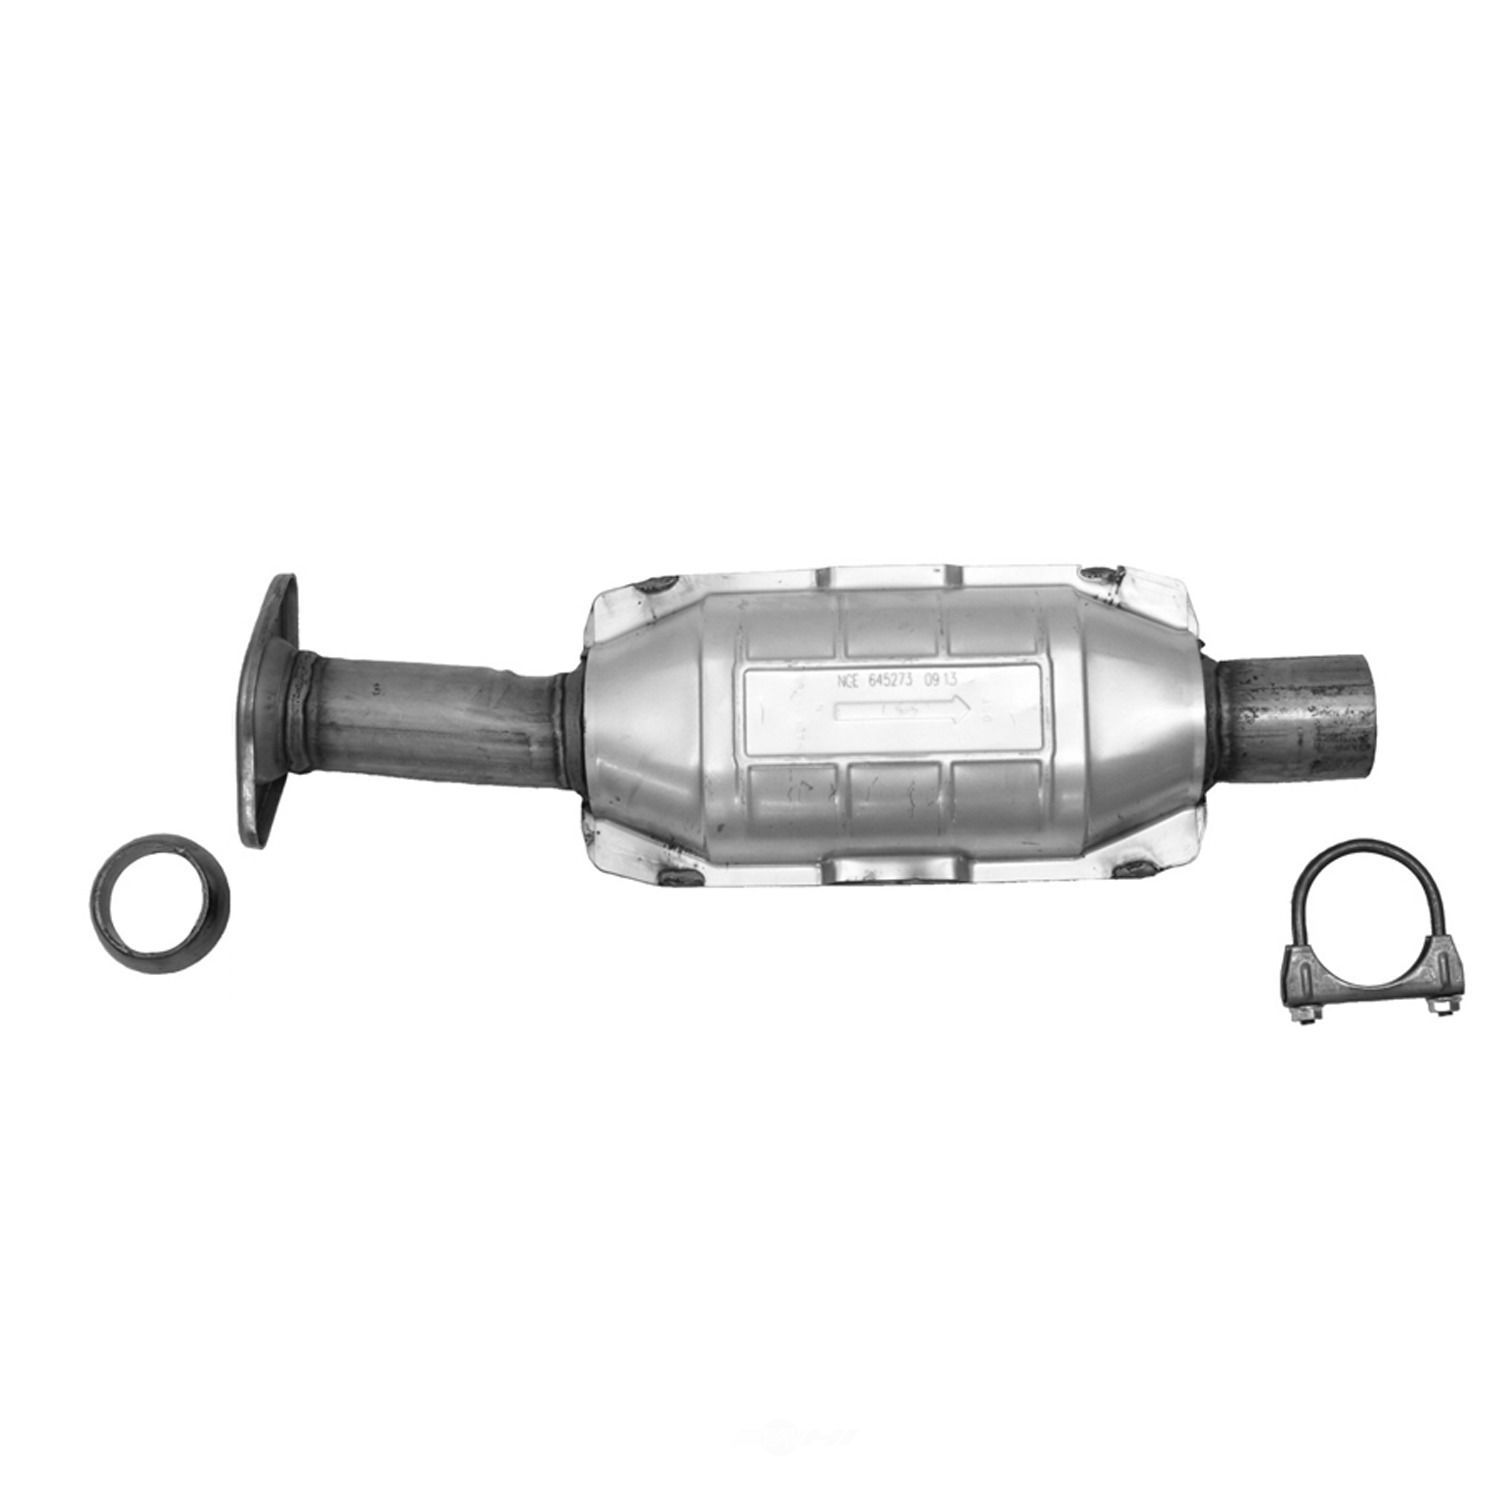 AP EXHAUST W/FEDERAL CONVERTER - Direct Fit Converter - APF 645273